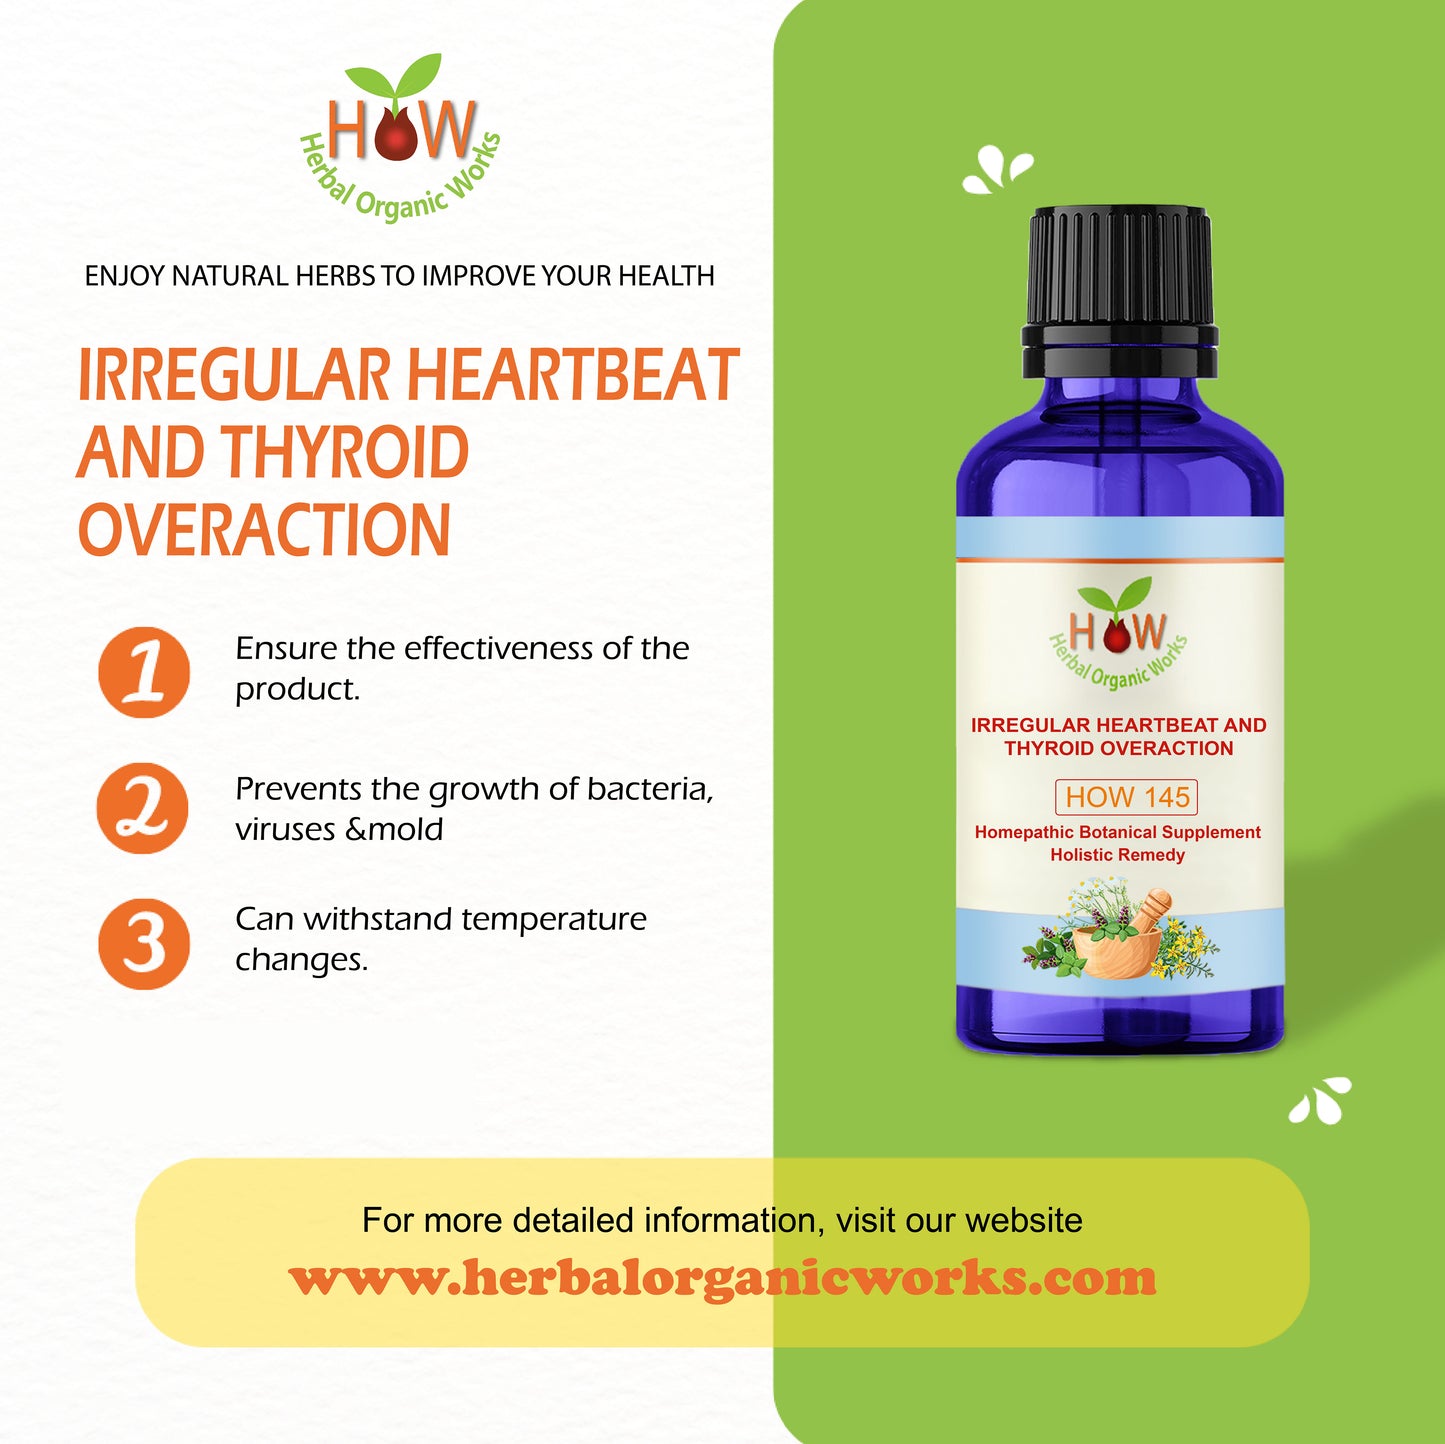 IRREGULAR HEART BEAT AND THYROID OVERACTION (HOW145)